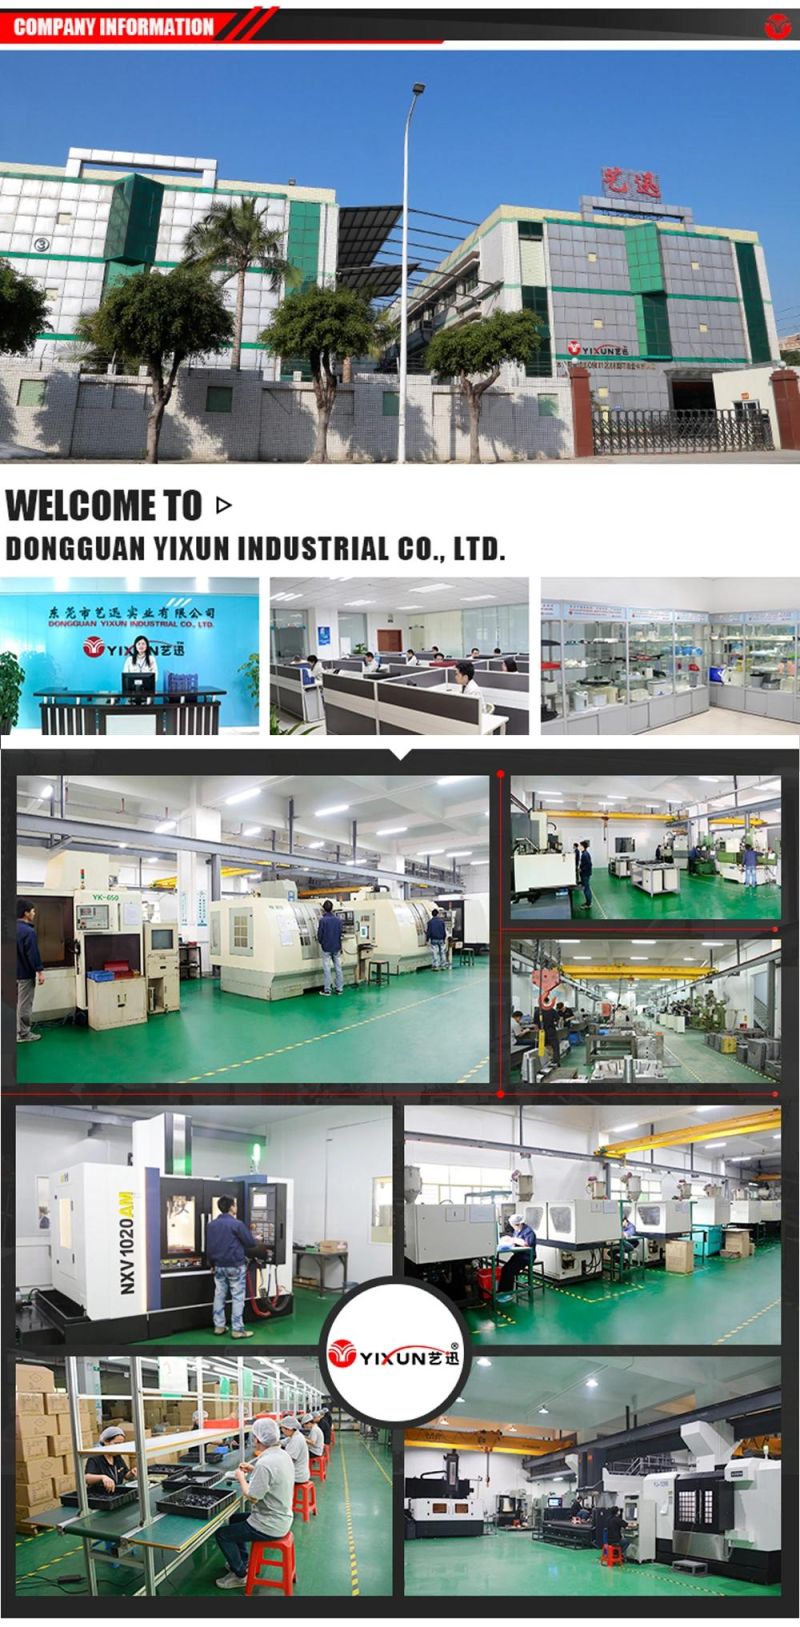 Dehumidifier Products Supply Plastic Injection Mold/Dehumidifier Mould Making Manufacture Injection Manufacturer Service